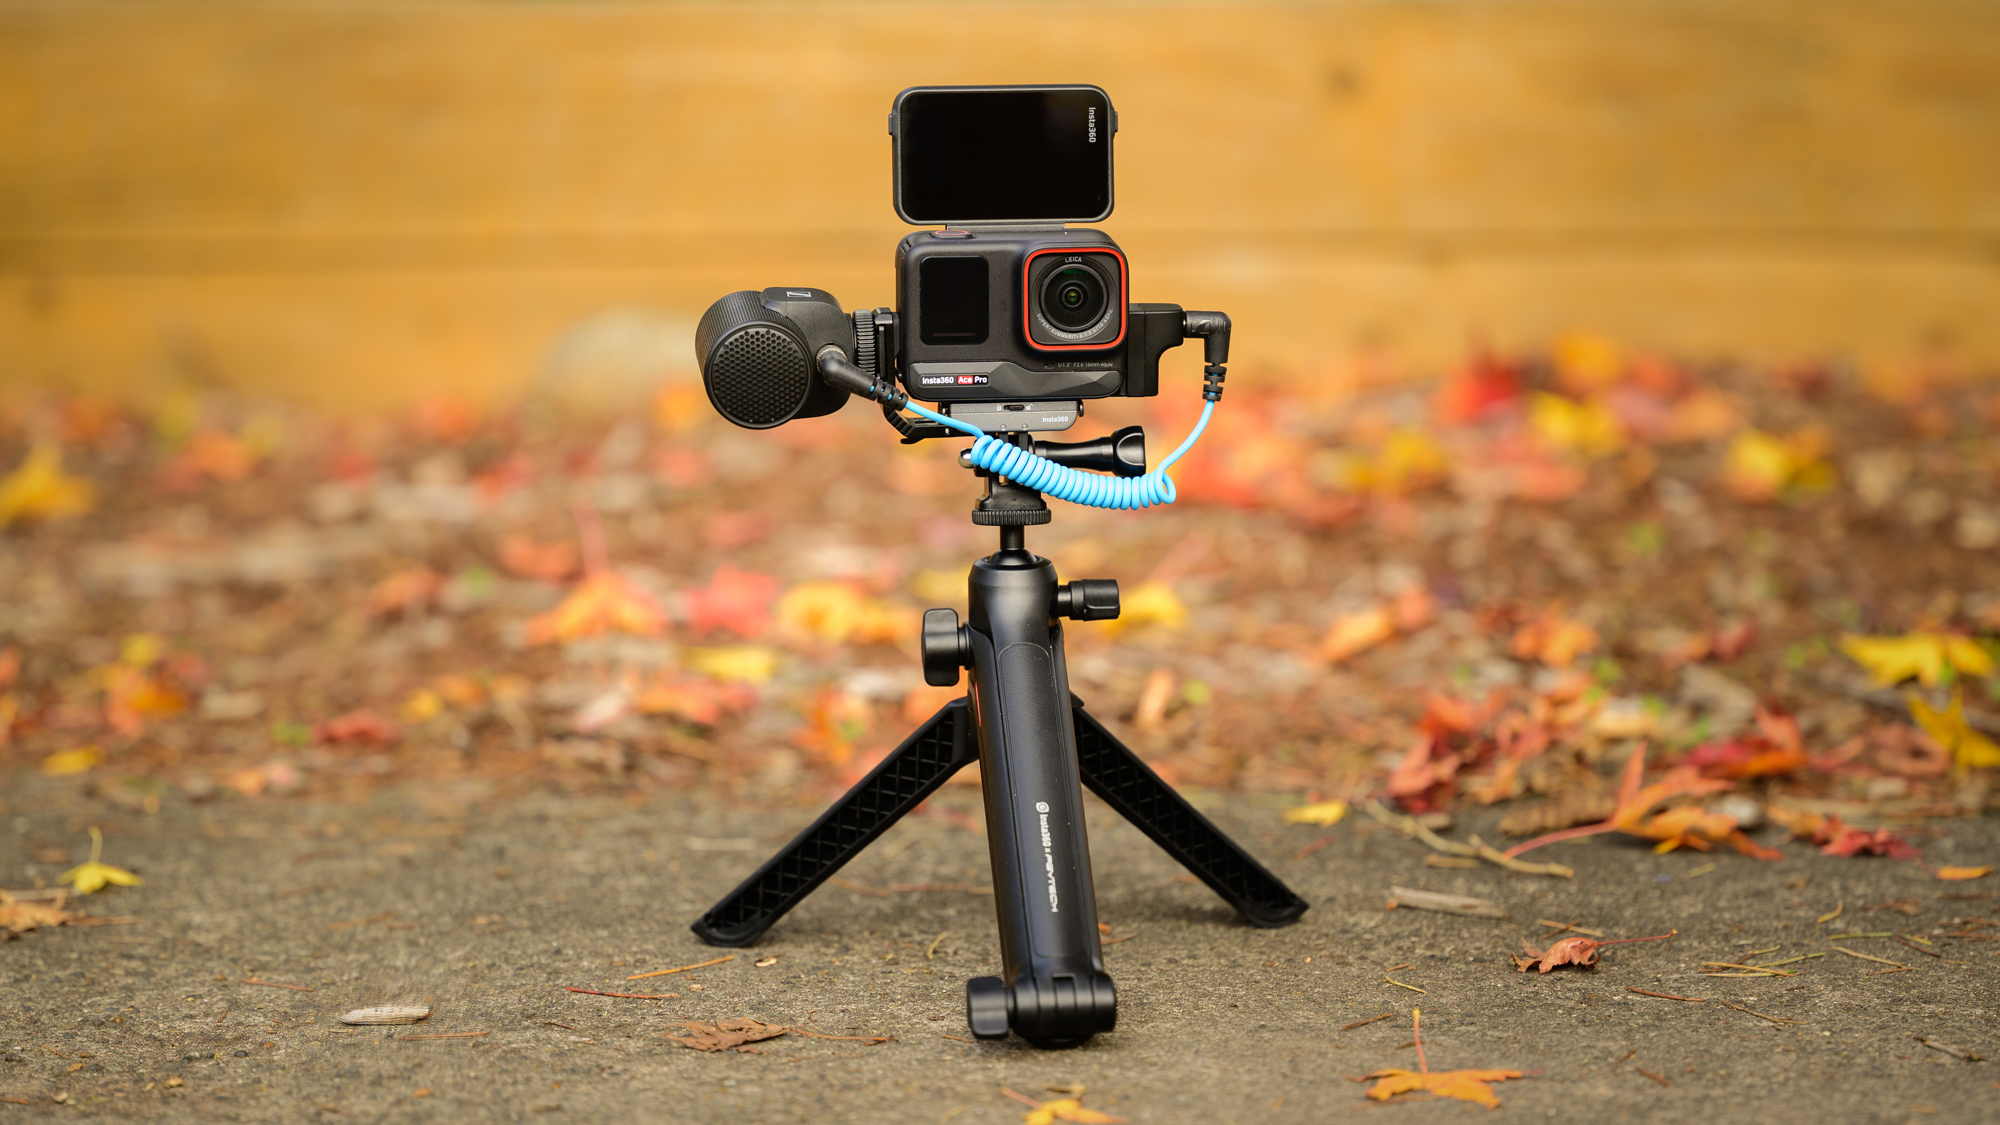 Insta360 Ace Pro review: the Leica action camera